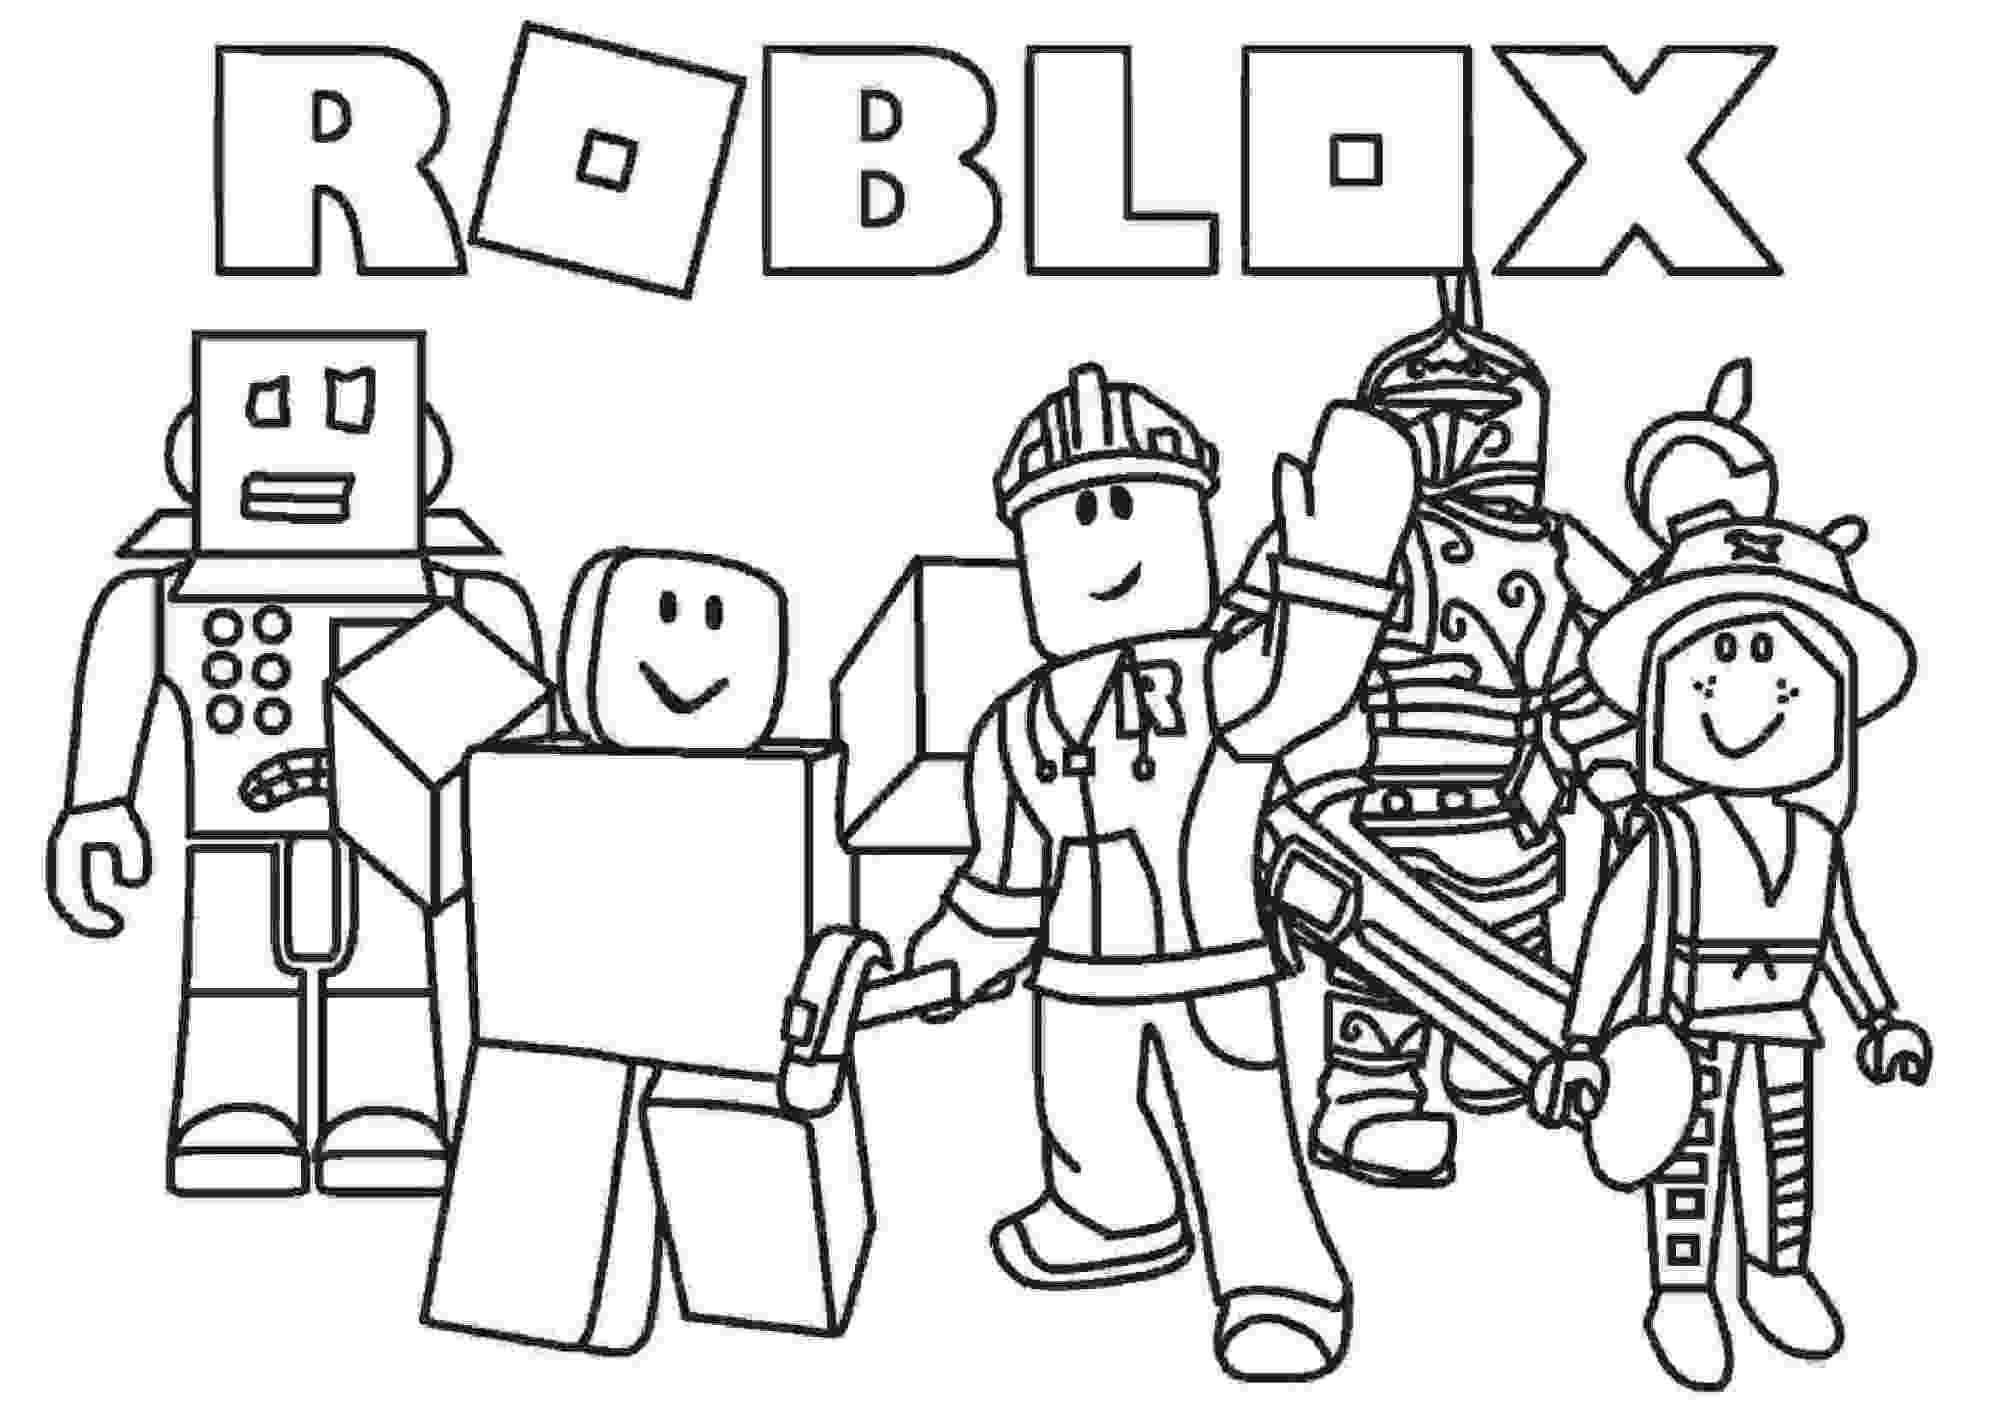 Roblox team protects the earth Coloring Pages - Free Printable Coloring